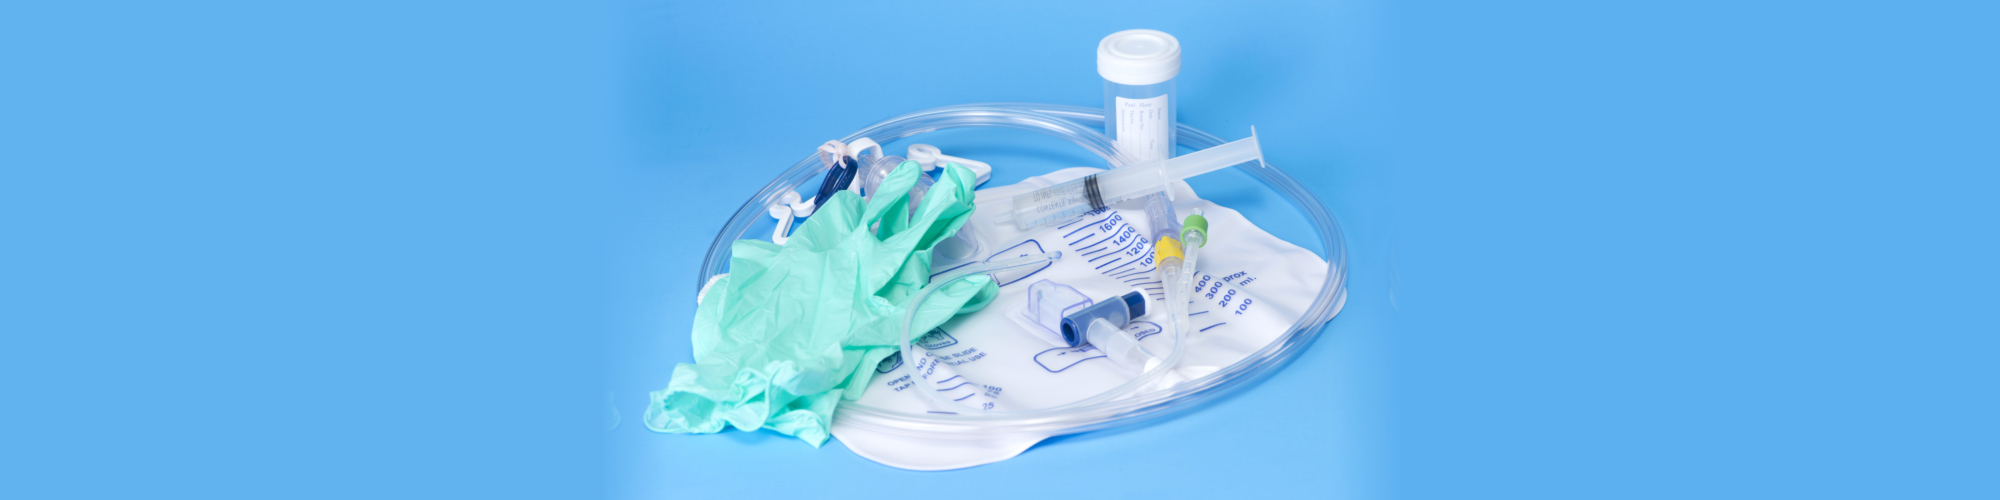 Foley catheter and drainage bag with sterile gloves and specimen container on blue background